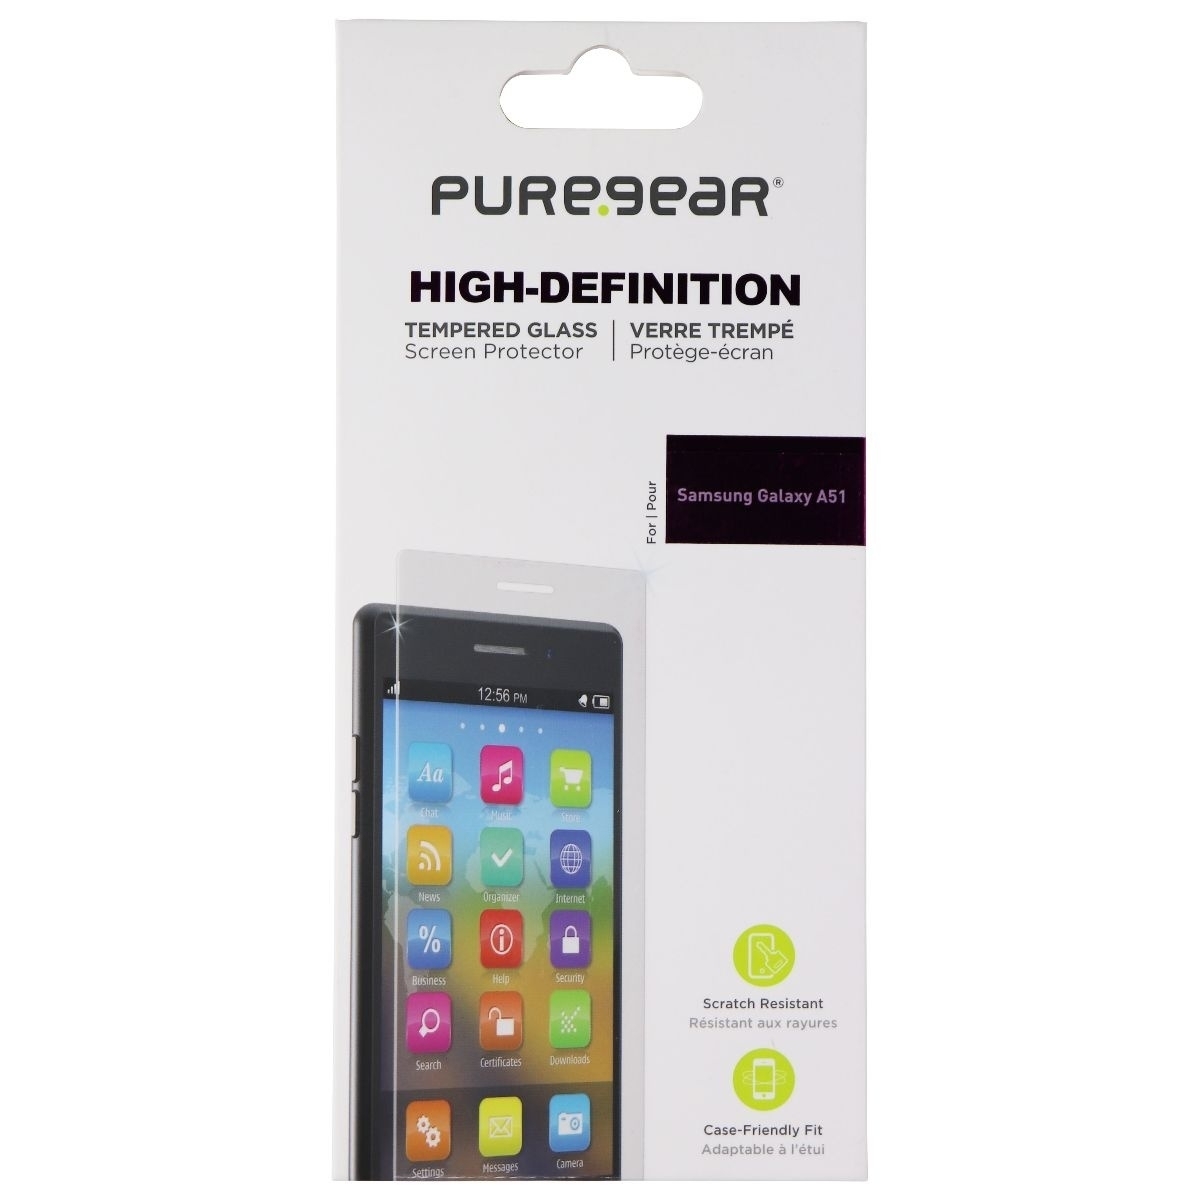 PureGear High-Definition Tempered Glass For Samsung Galaxy A51 - Clear